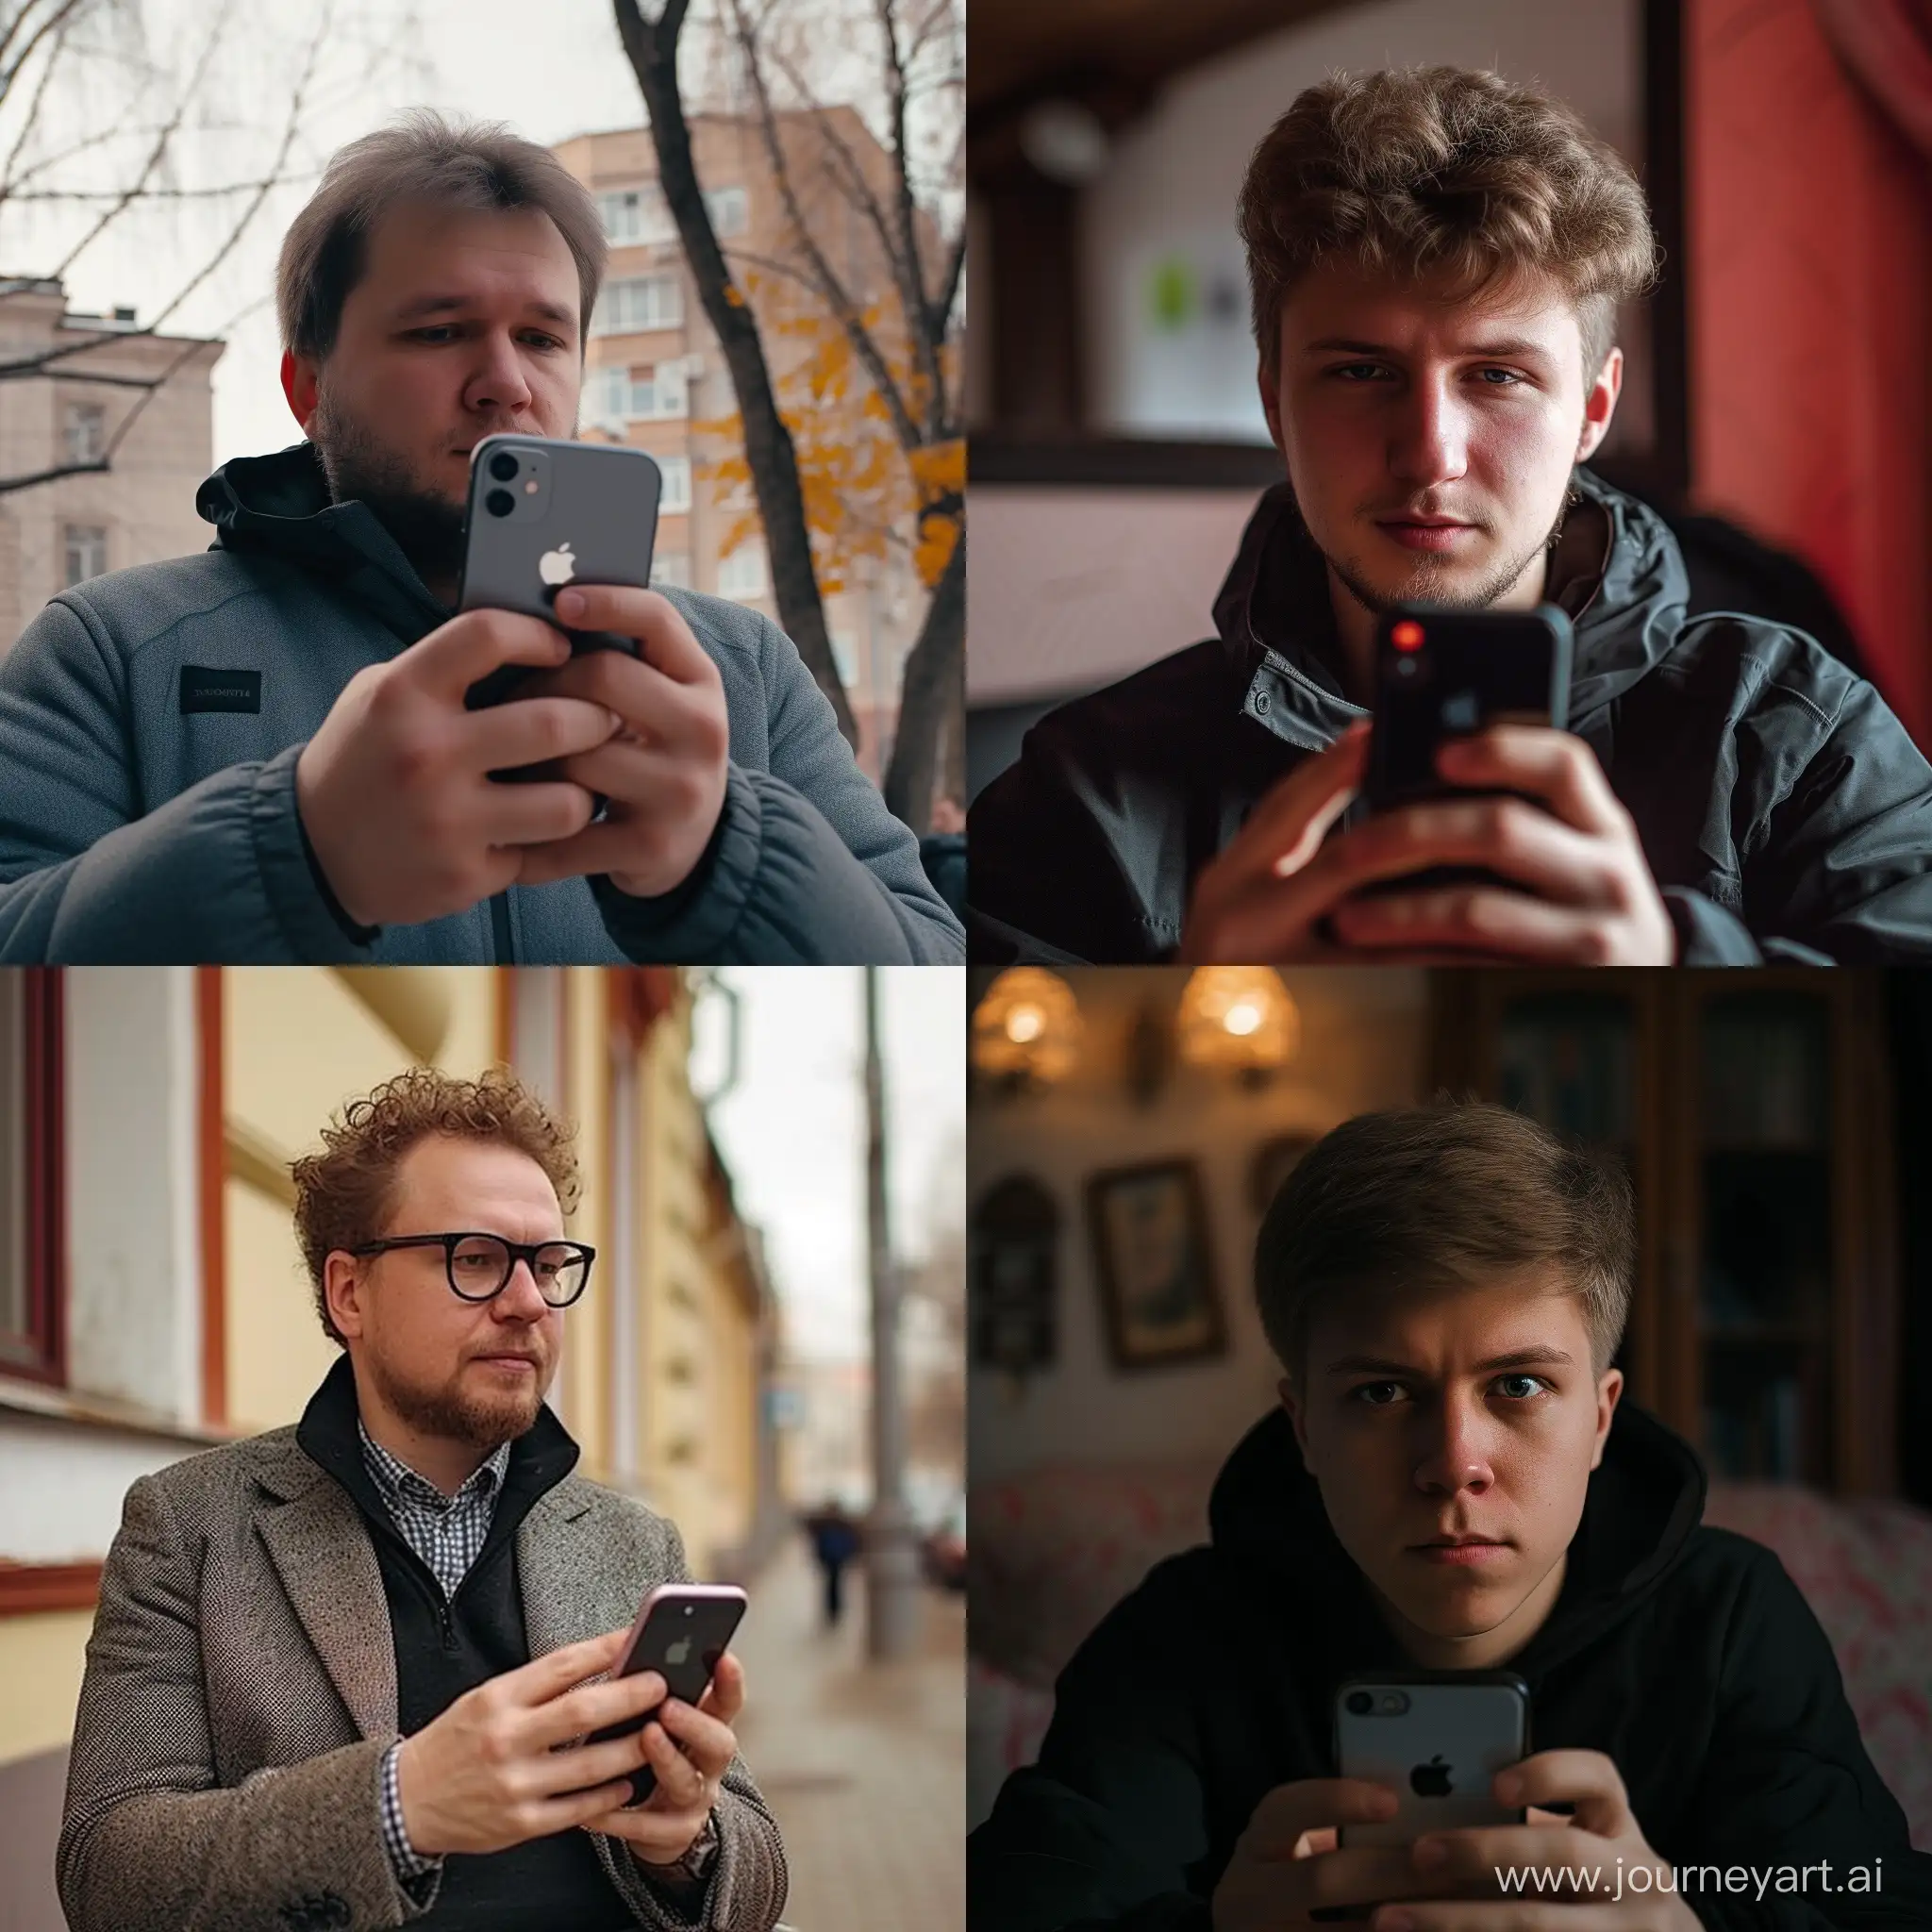 Max-Maxbetov-Capturing-Urban-Vibes-with-iPhone-6-in-11-Aspect-Ratio